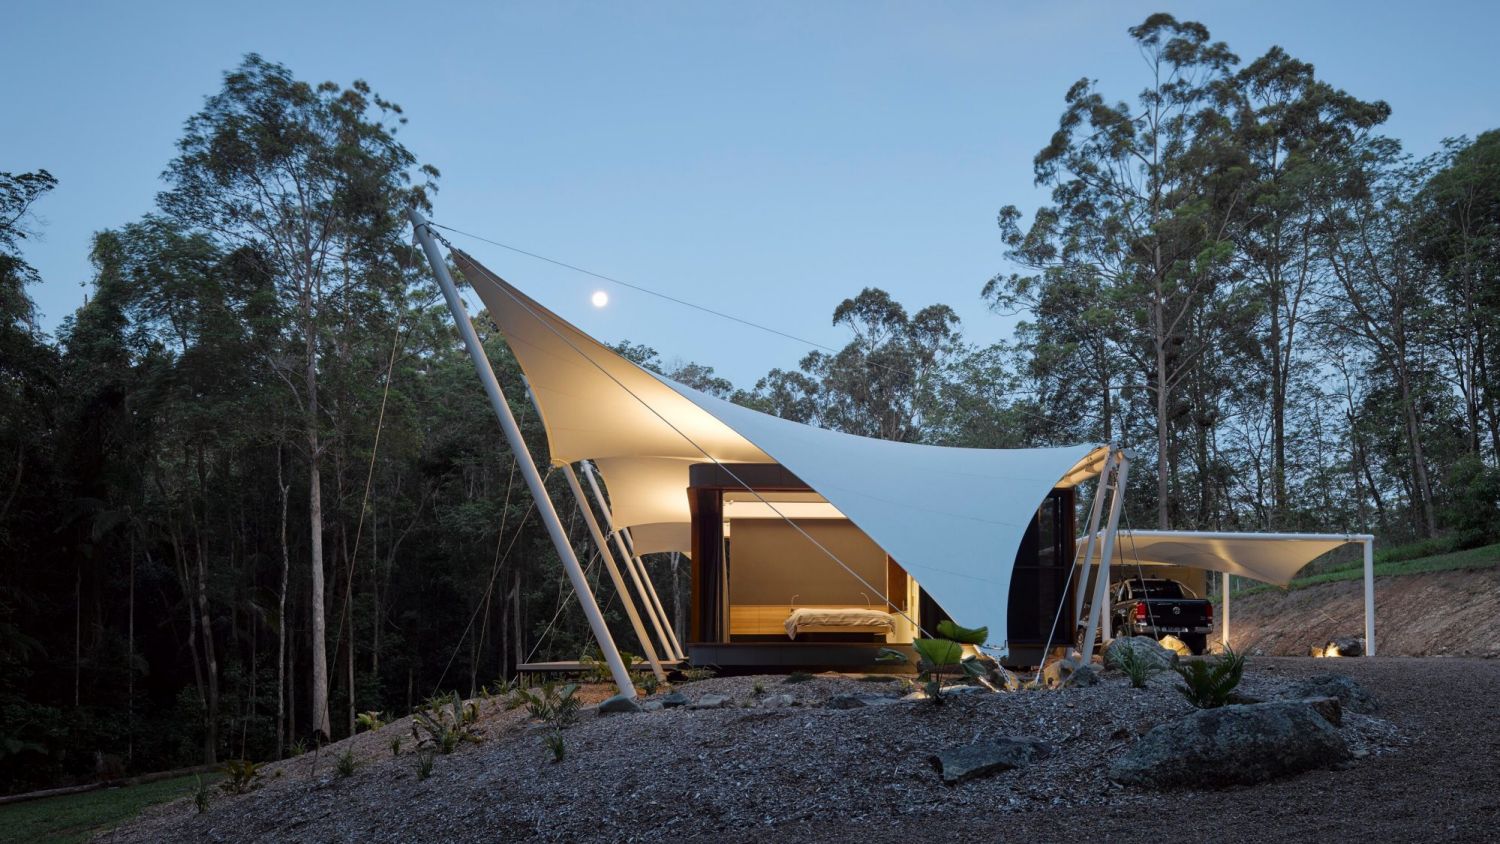 The tent house, which sits beneath dramatic sail-like structures at the edge of dense rainforest near Doonan, has earned Sparks Architects the Regional Project of the Year award at the 2017 Sunshine Coast Regional Architecture Awards.